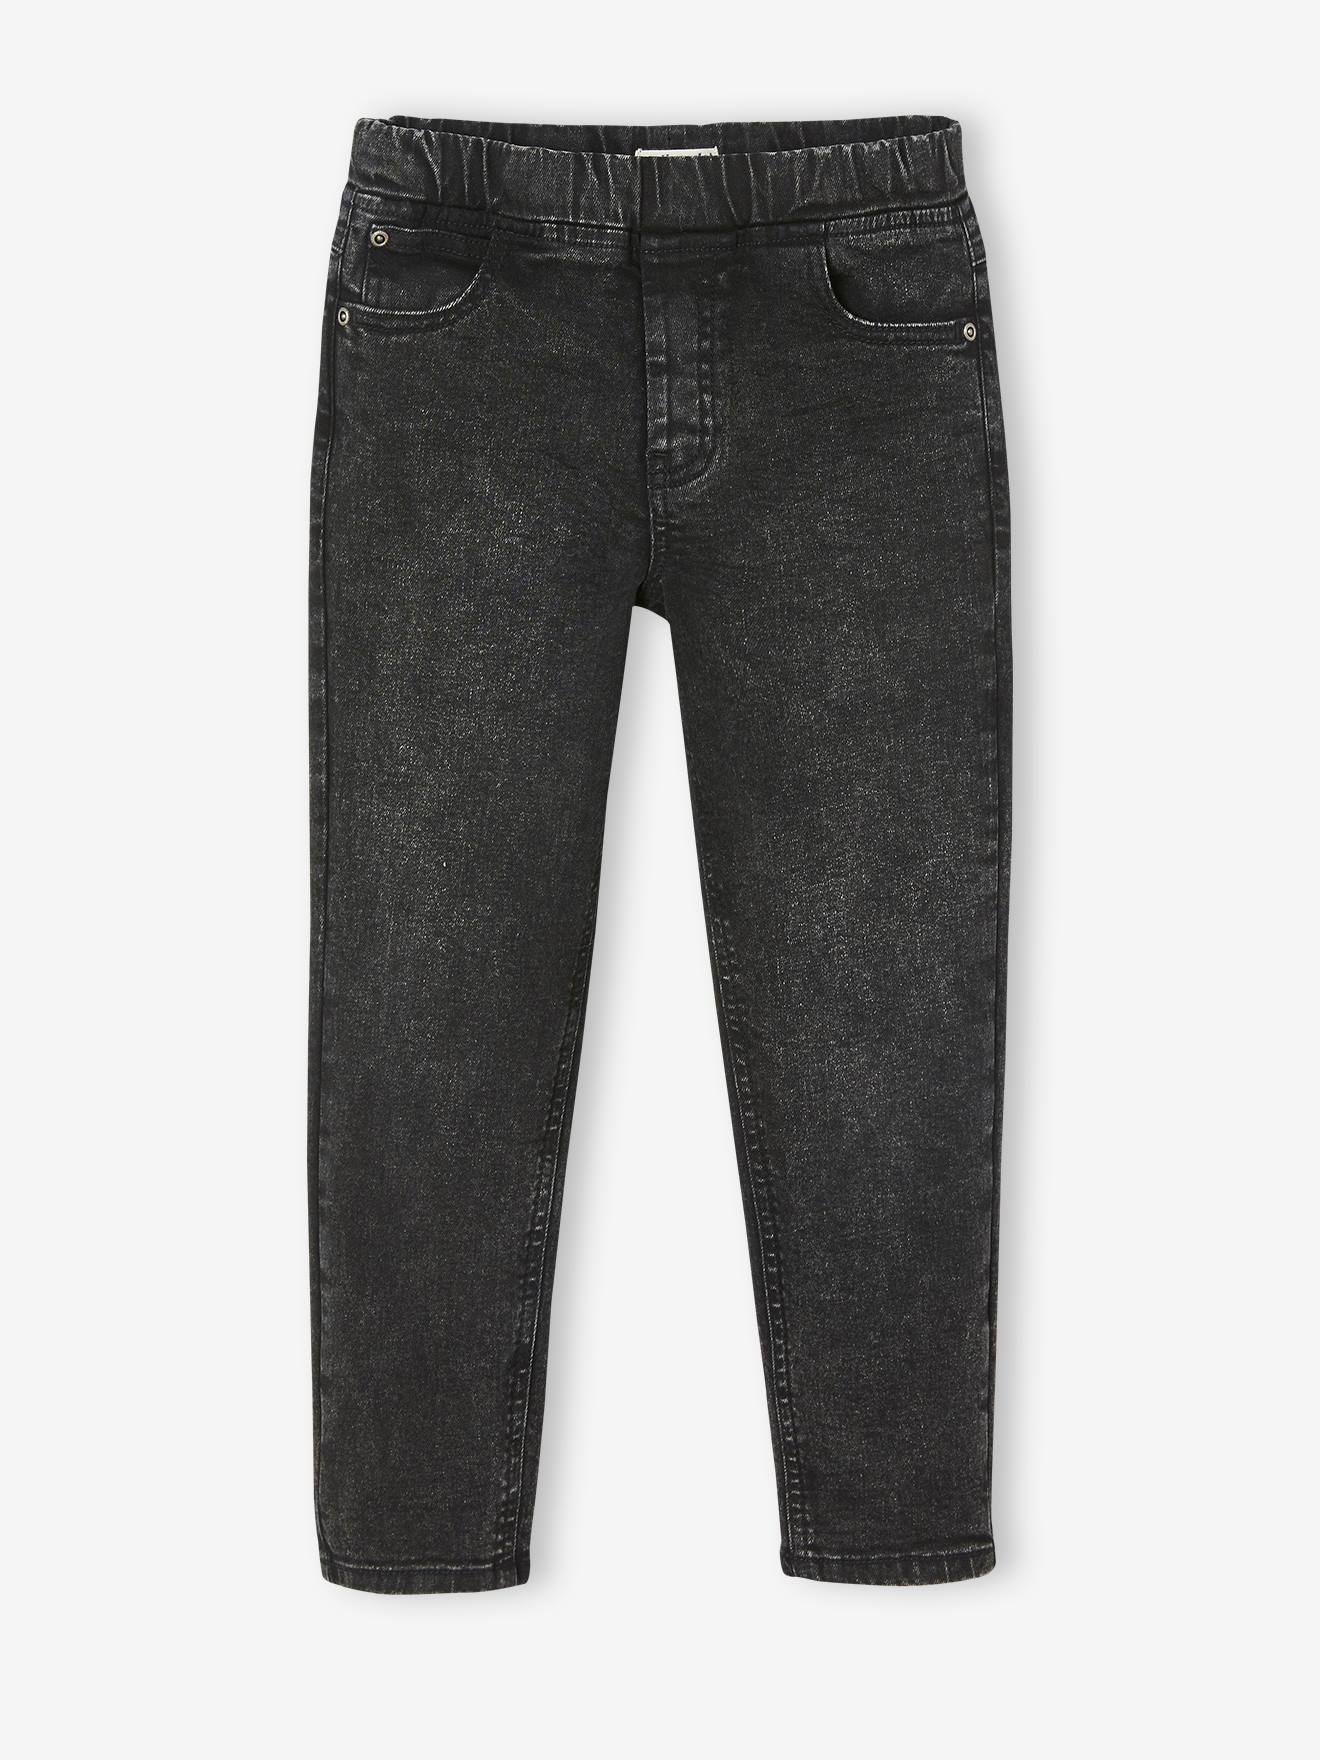 Balloon Ultra High Ankle Jeans - Black - Ladies | H&M US